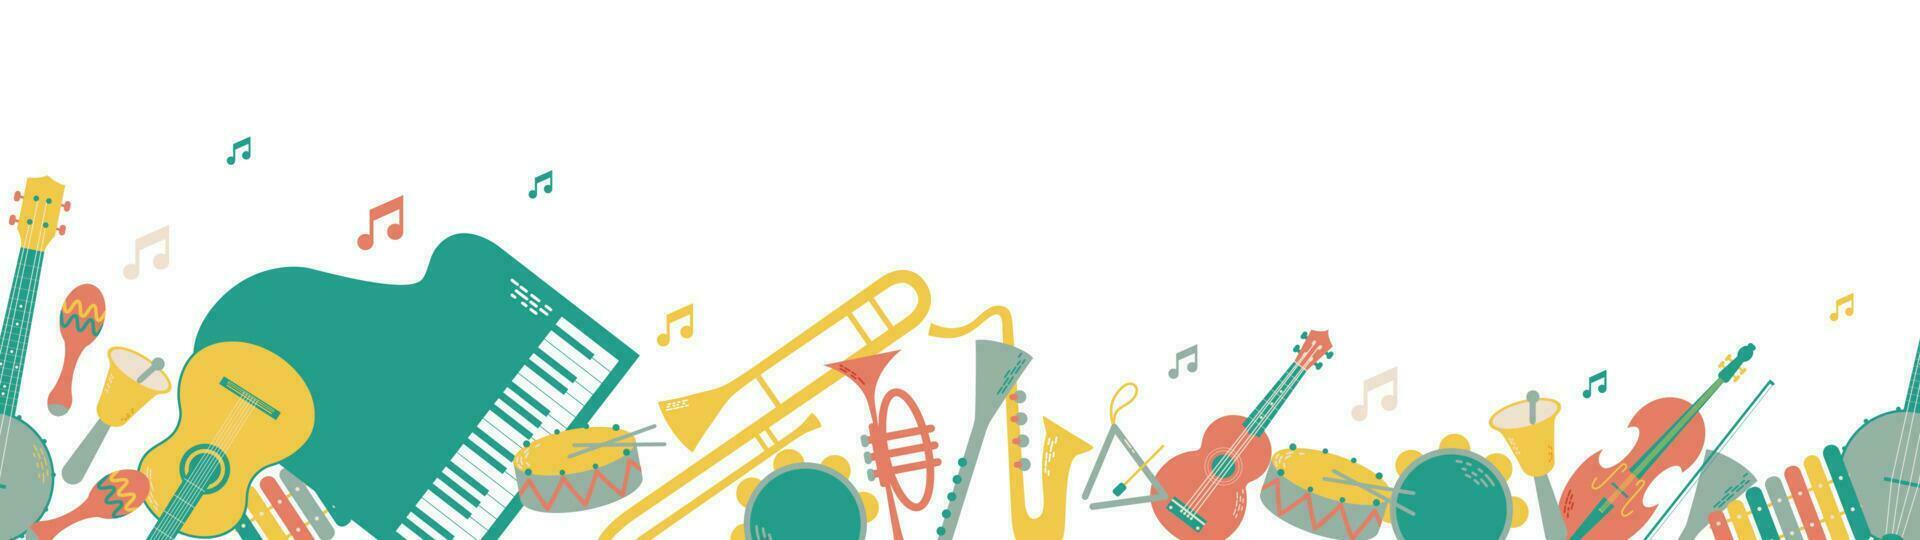 Vector long background or banner with musical instruments. Orchestra includs drum, maracas, triangle, bell, xylophone, tambourine, piano, trumpet, saxophone, clarinet, trombone, guitar, banjo, ukulele